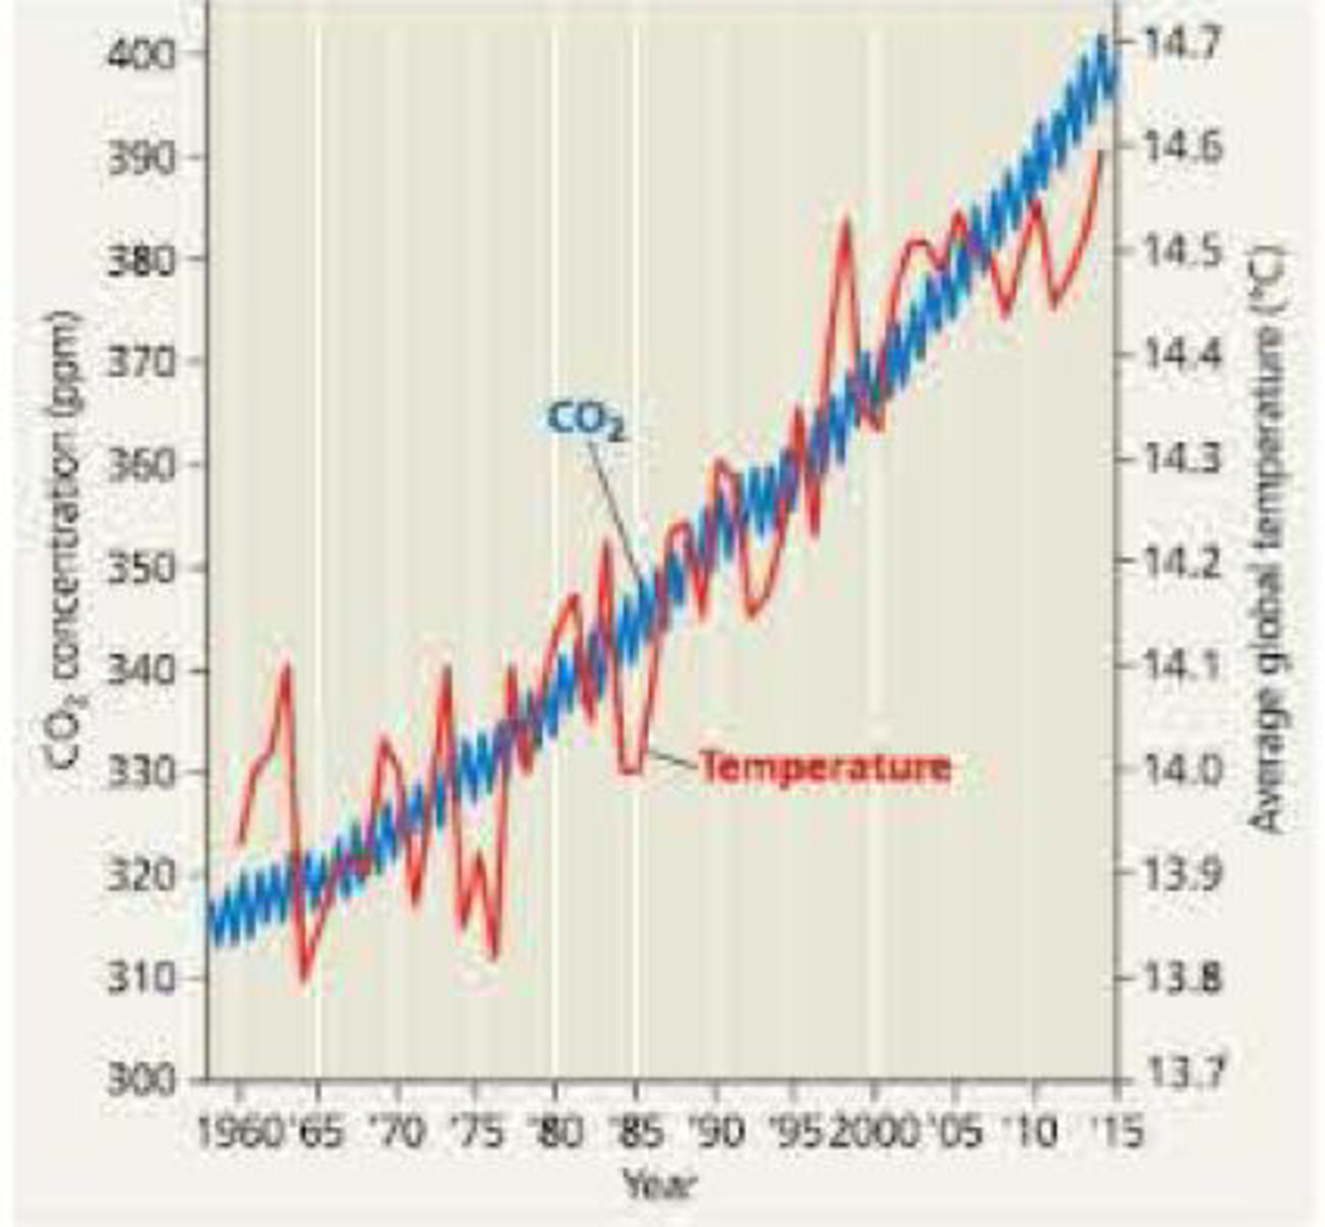 Chapter 43, Problem 7TYU, DRAW IT (a) Estimate the average CO2 concentration in 1975 and in 2012 using the data provided in 